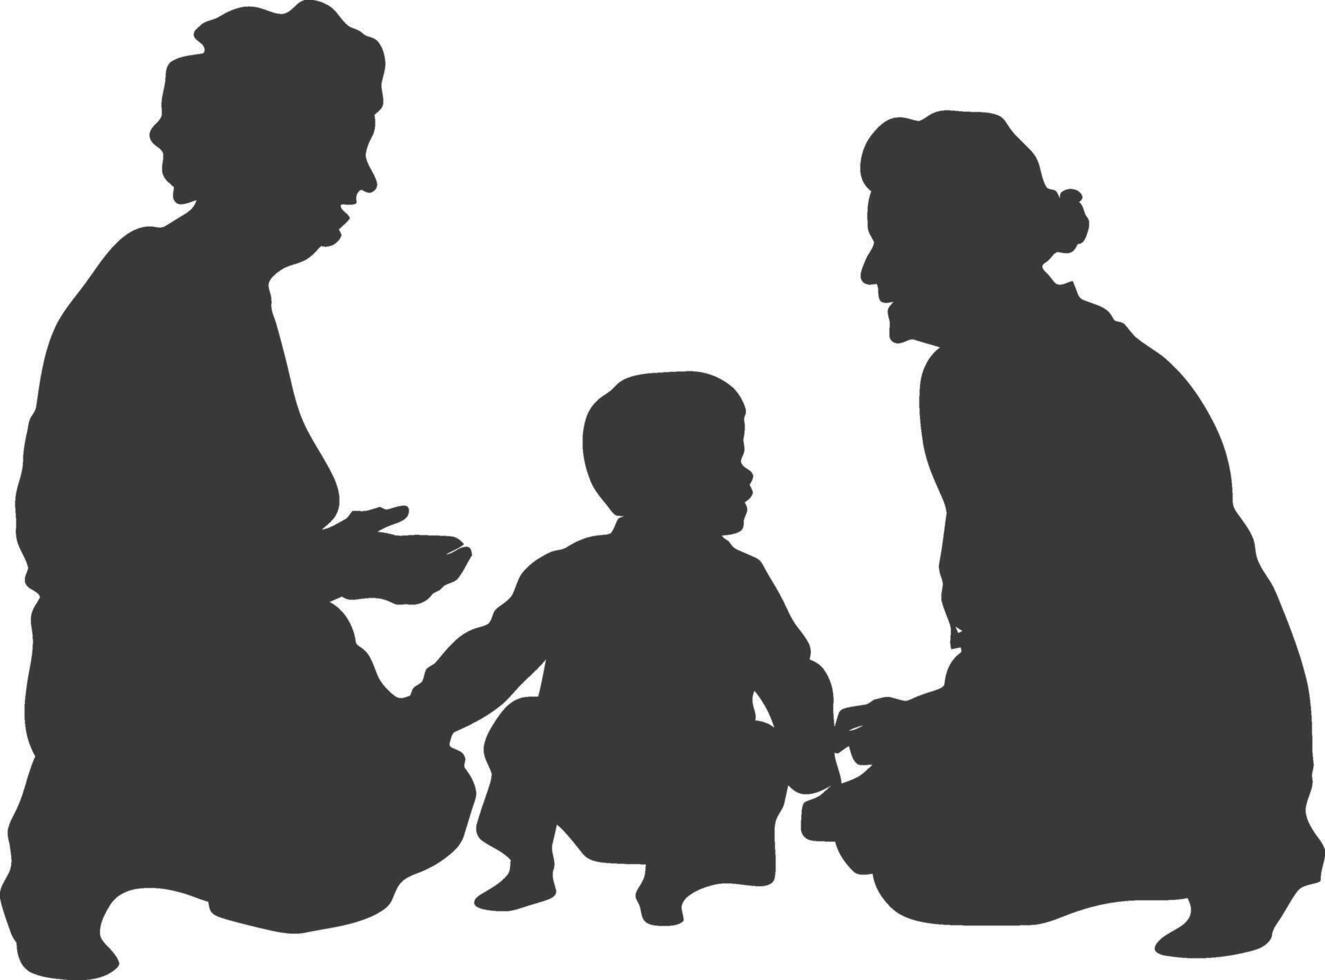 Silhouette elderly women and little boy were sitting while talking black color only vector